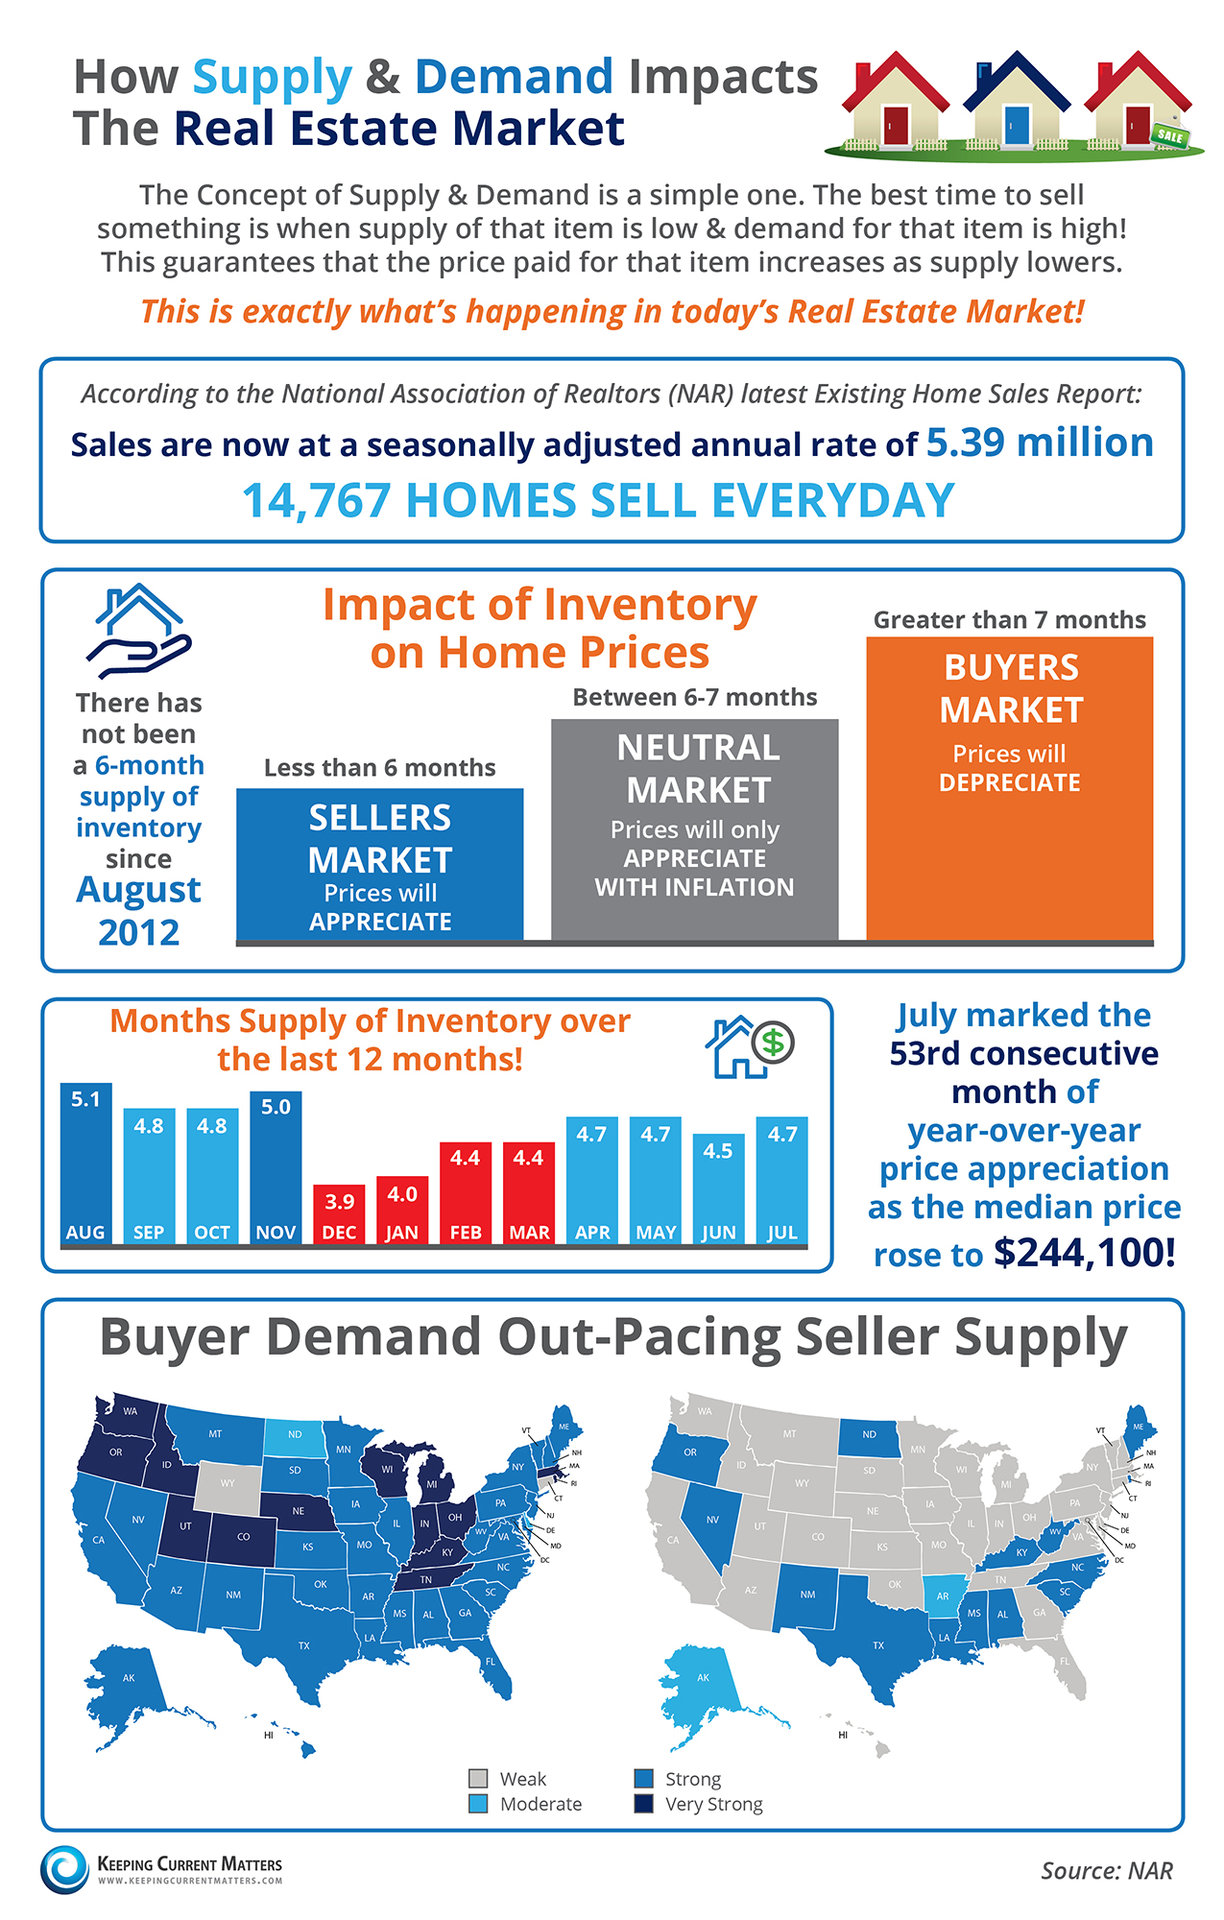 How Supply & Demand Impacts the Real Estate Market [INFOGRAPHIC] | Keeping Current Matters